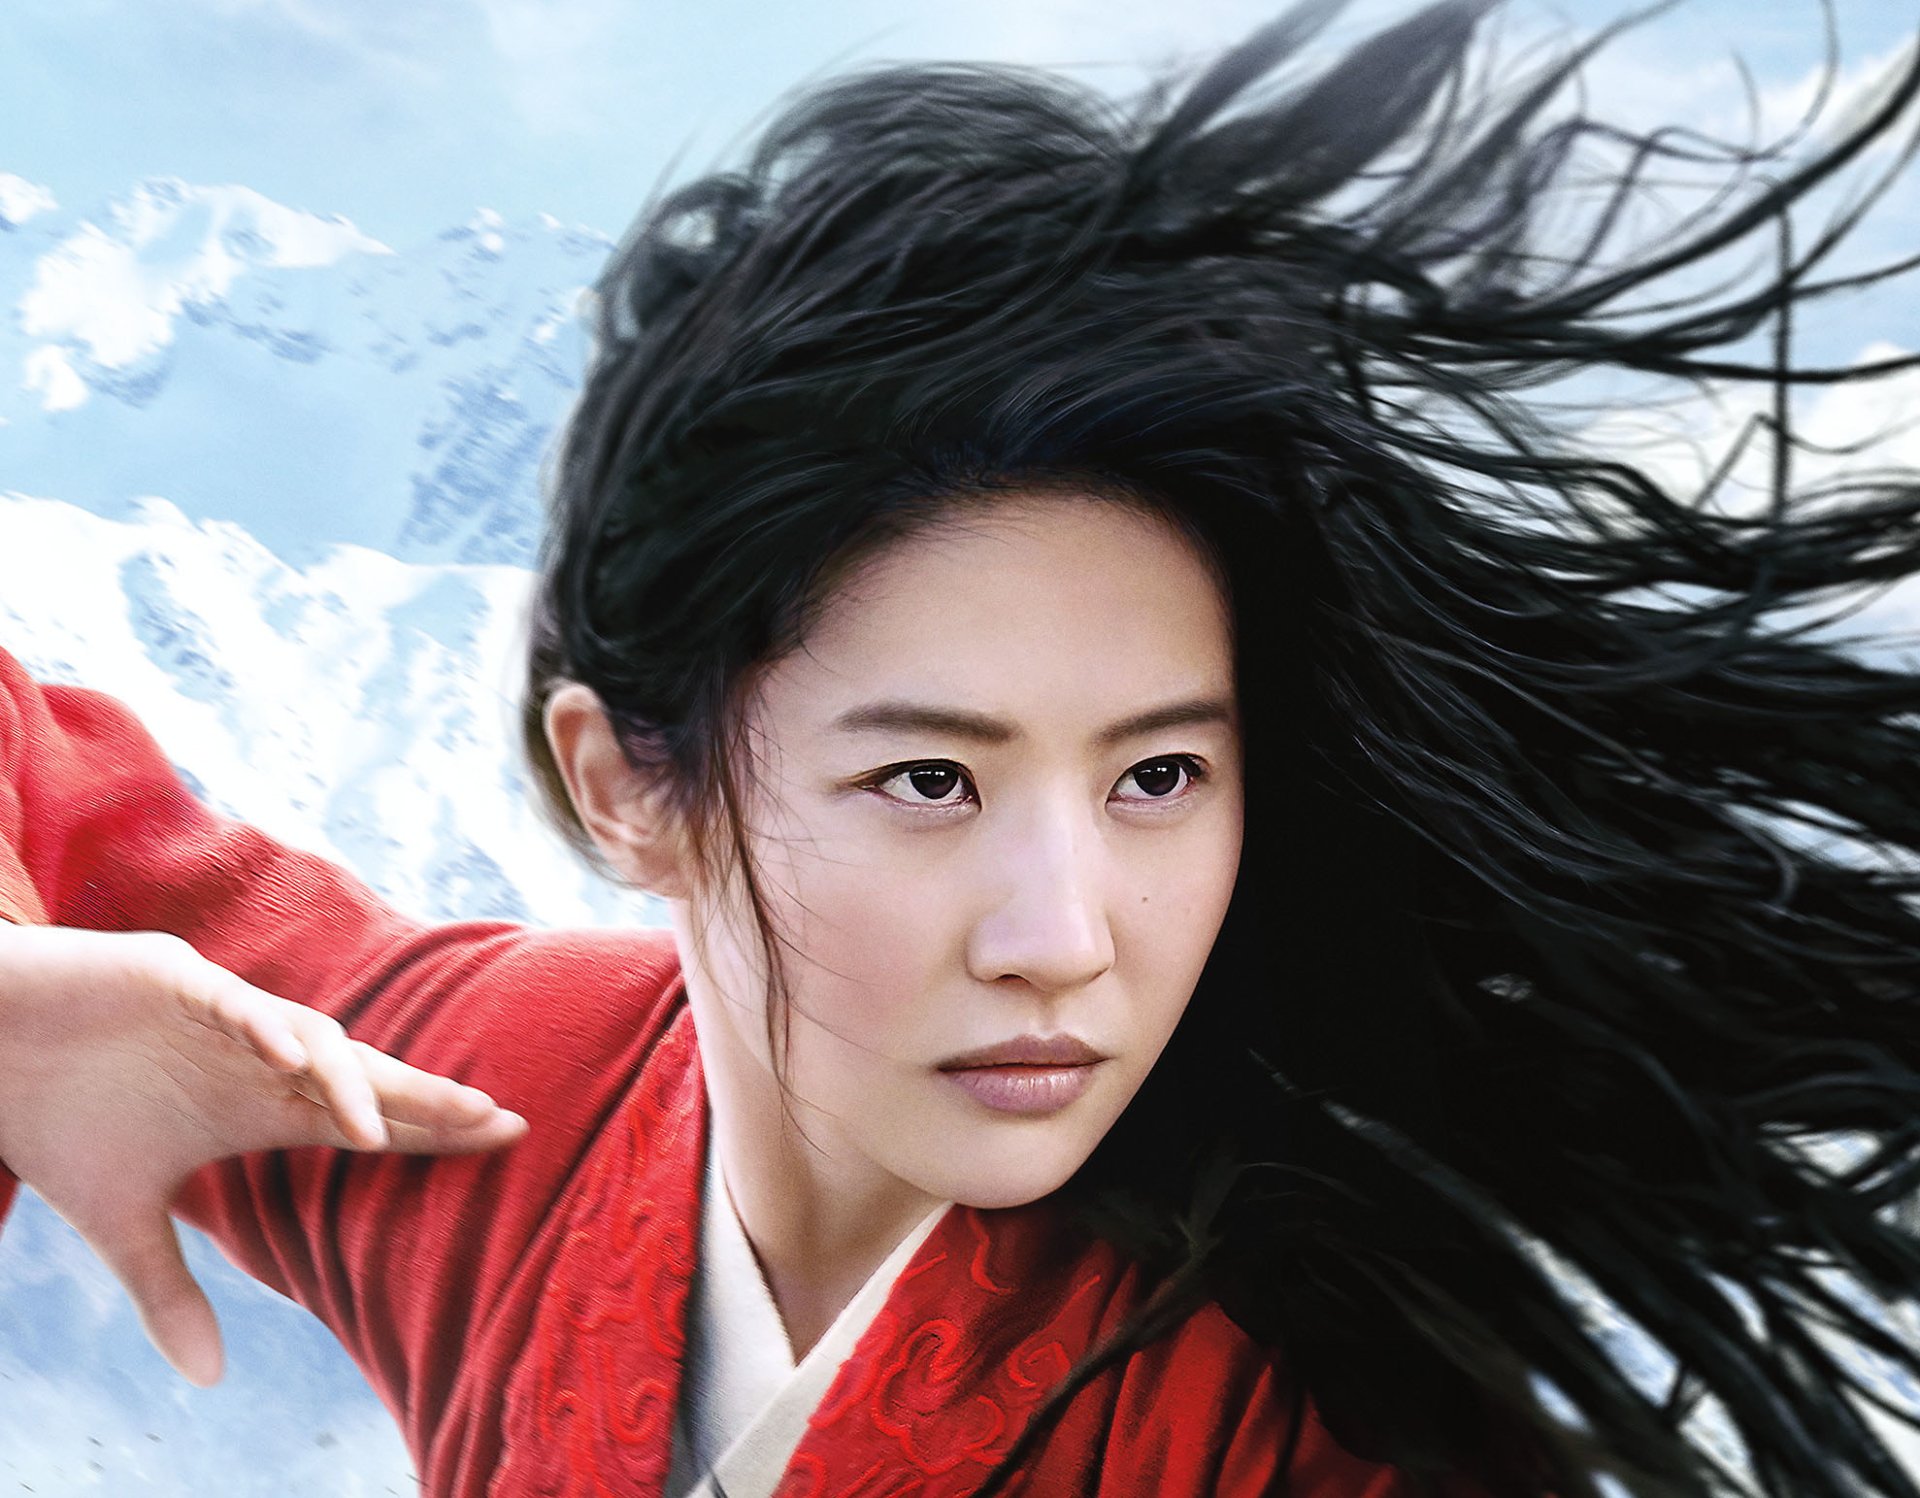 The problem with Mulan: why the live-action remake is a lightning